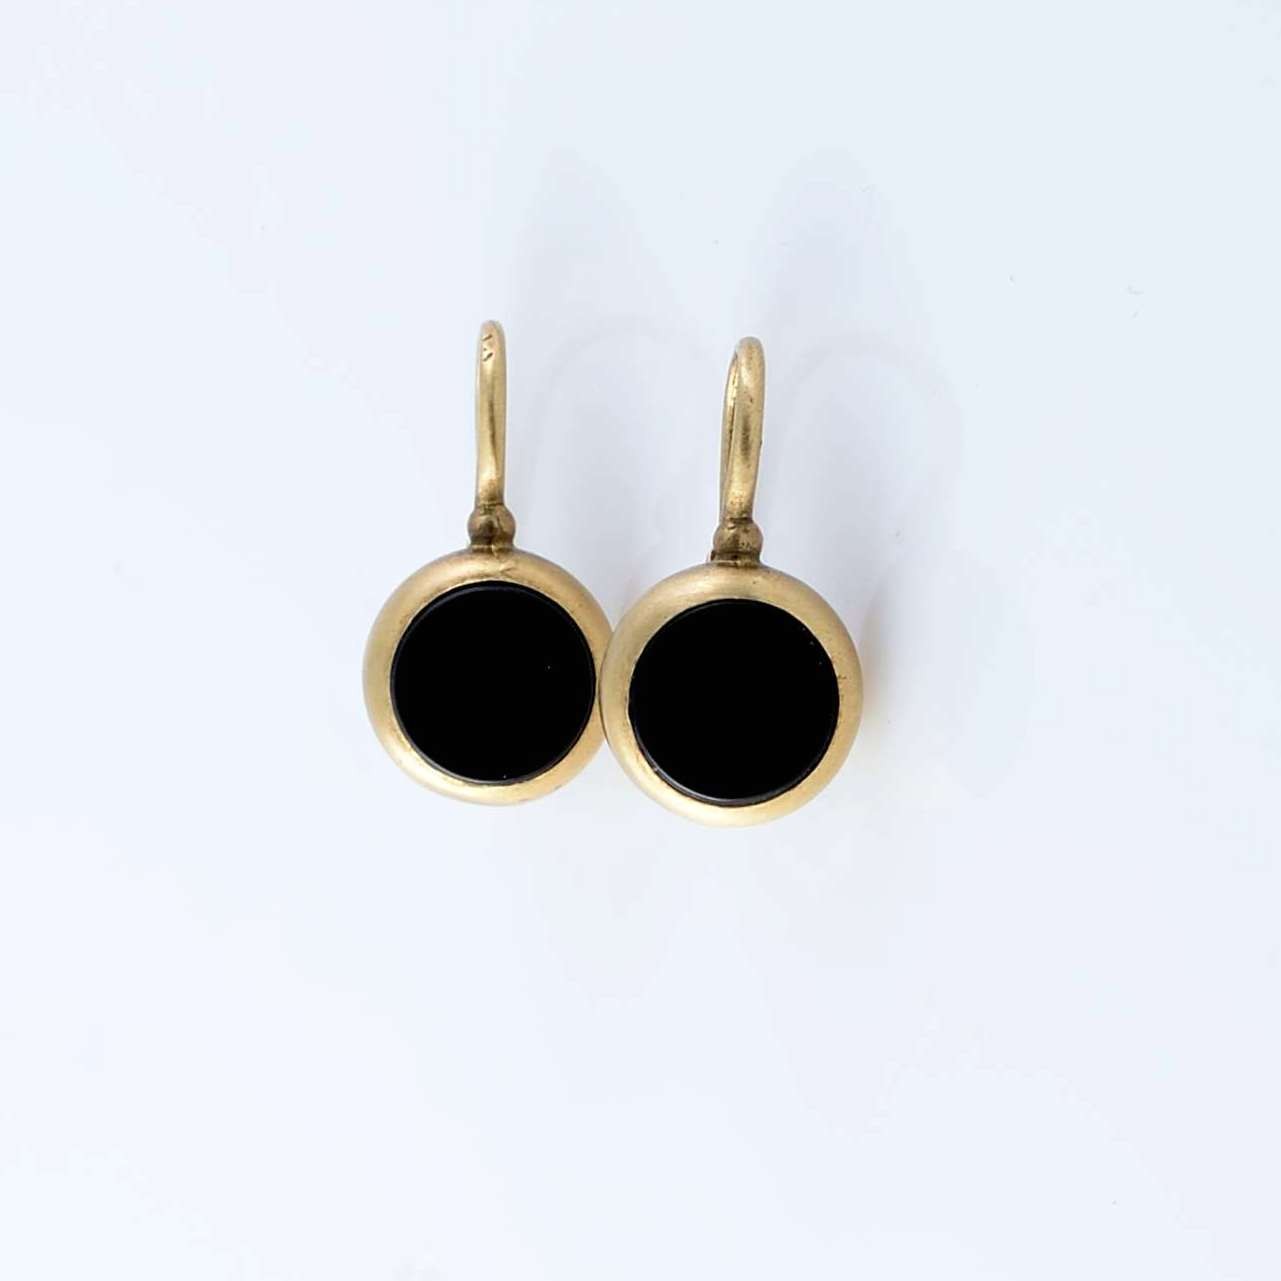 Gold earrings with onyx stones